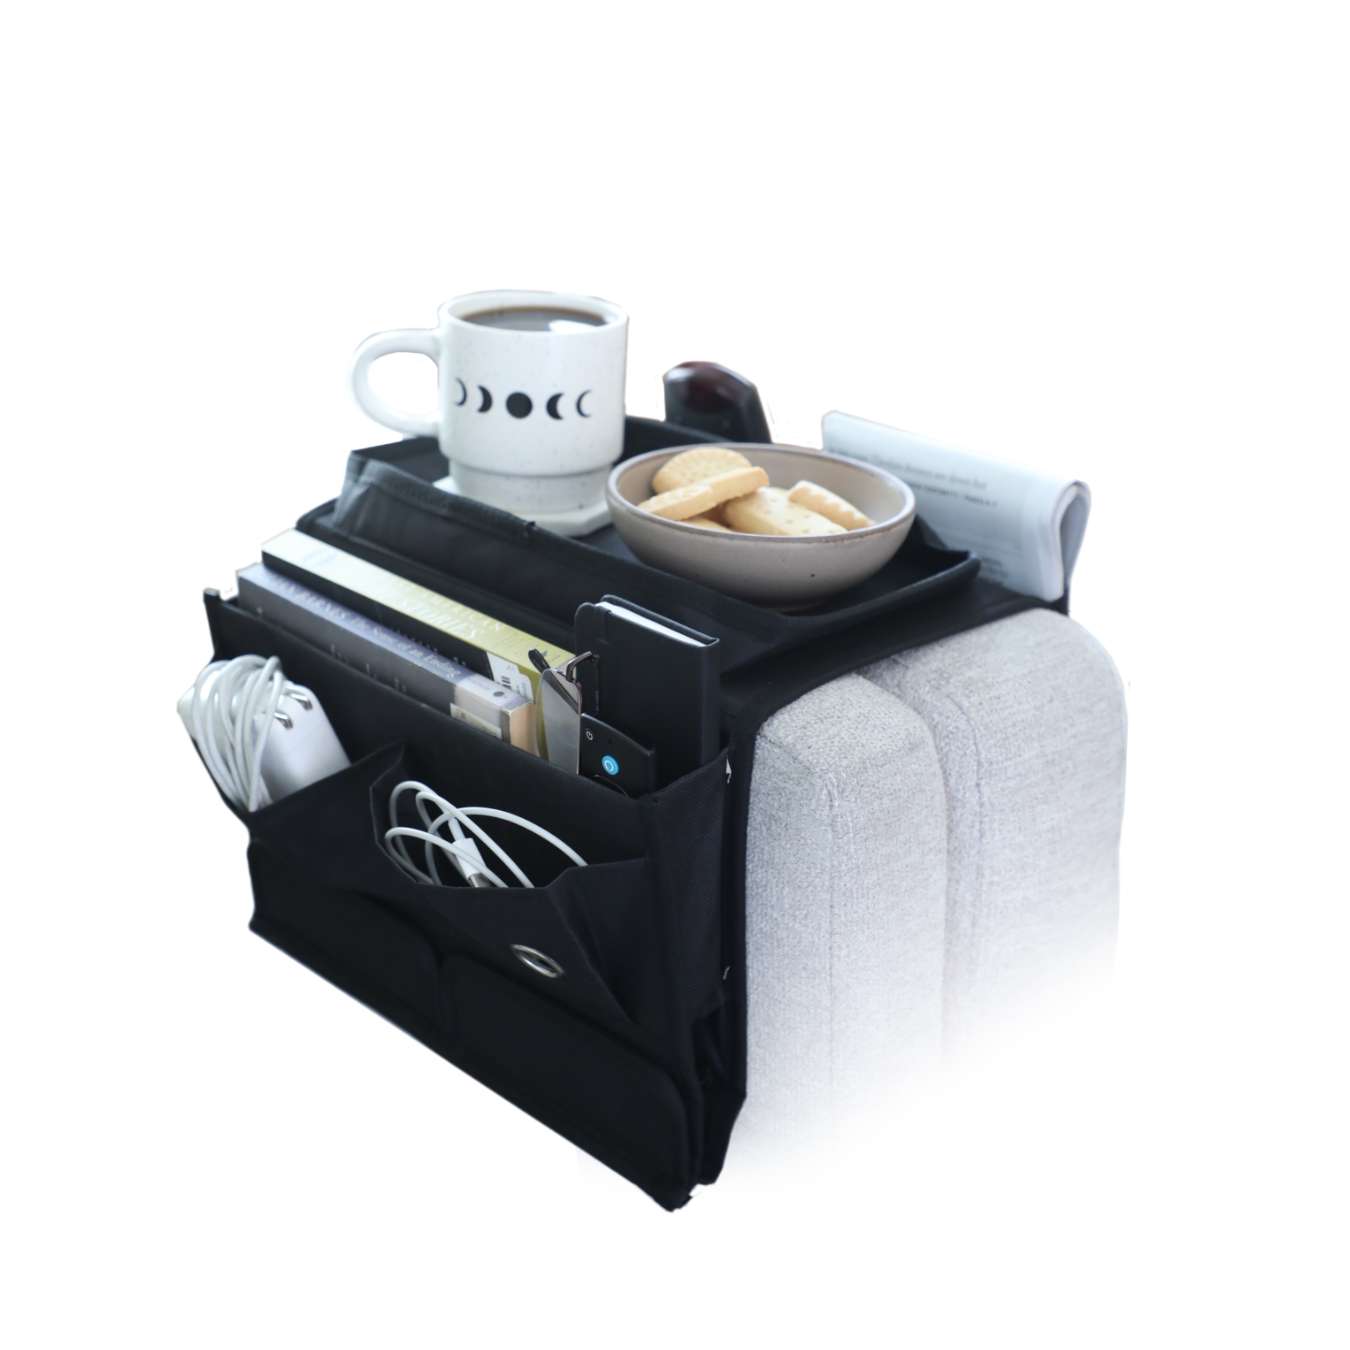 View Couch Potato Caddy 6Pocket Sofa Organiser Pocket For Phone Charger Snack Tray On Top Save Space High Street TV information